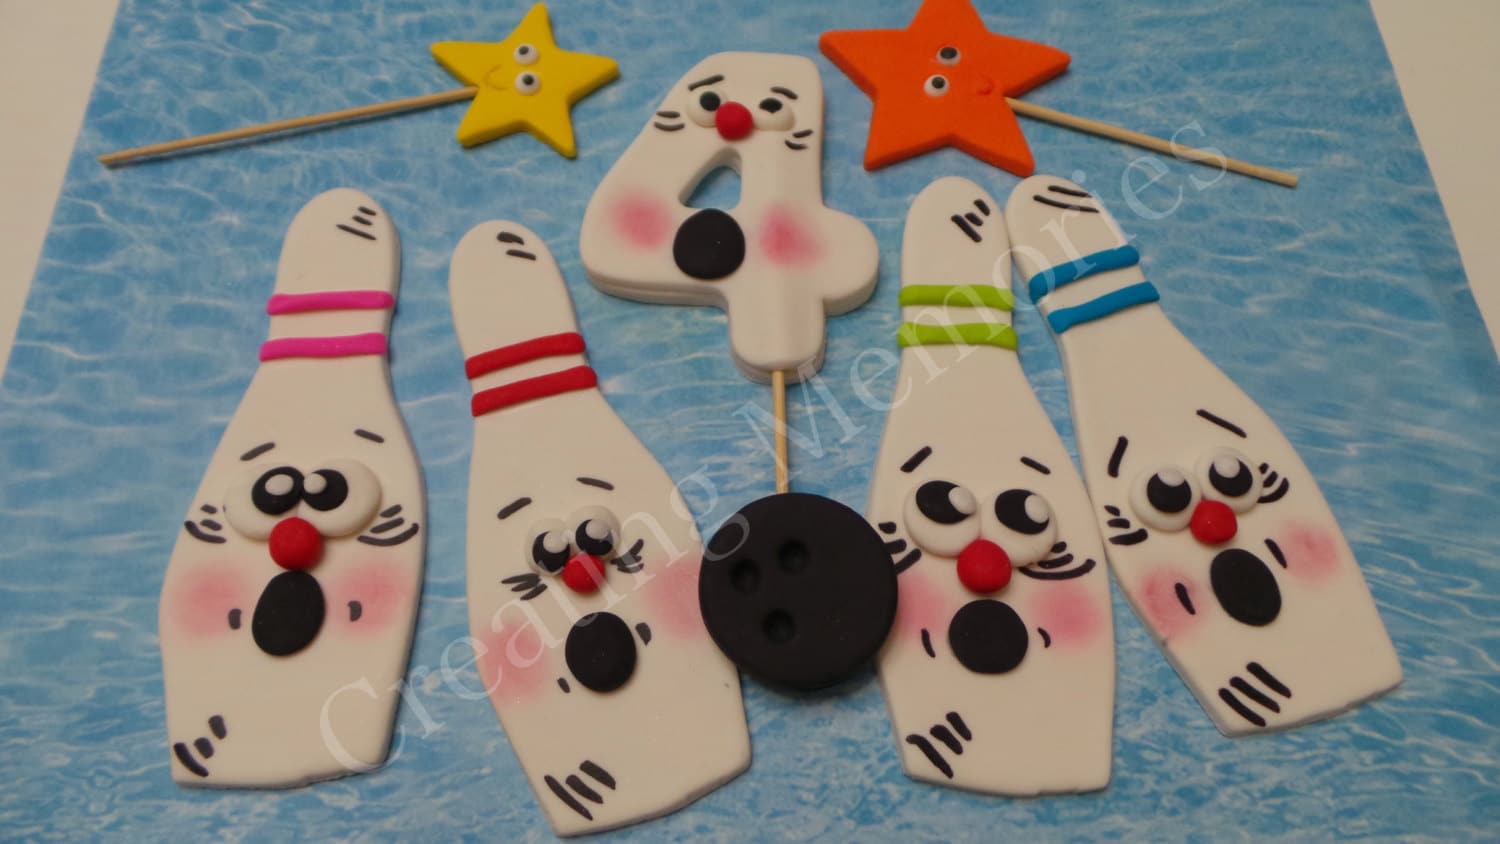 BOWLING PINS Ready To Use Cake Decorations Make Your Childs